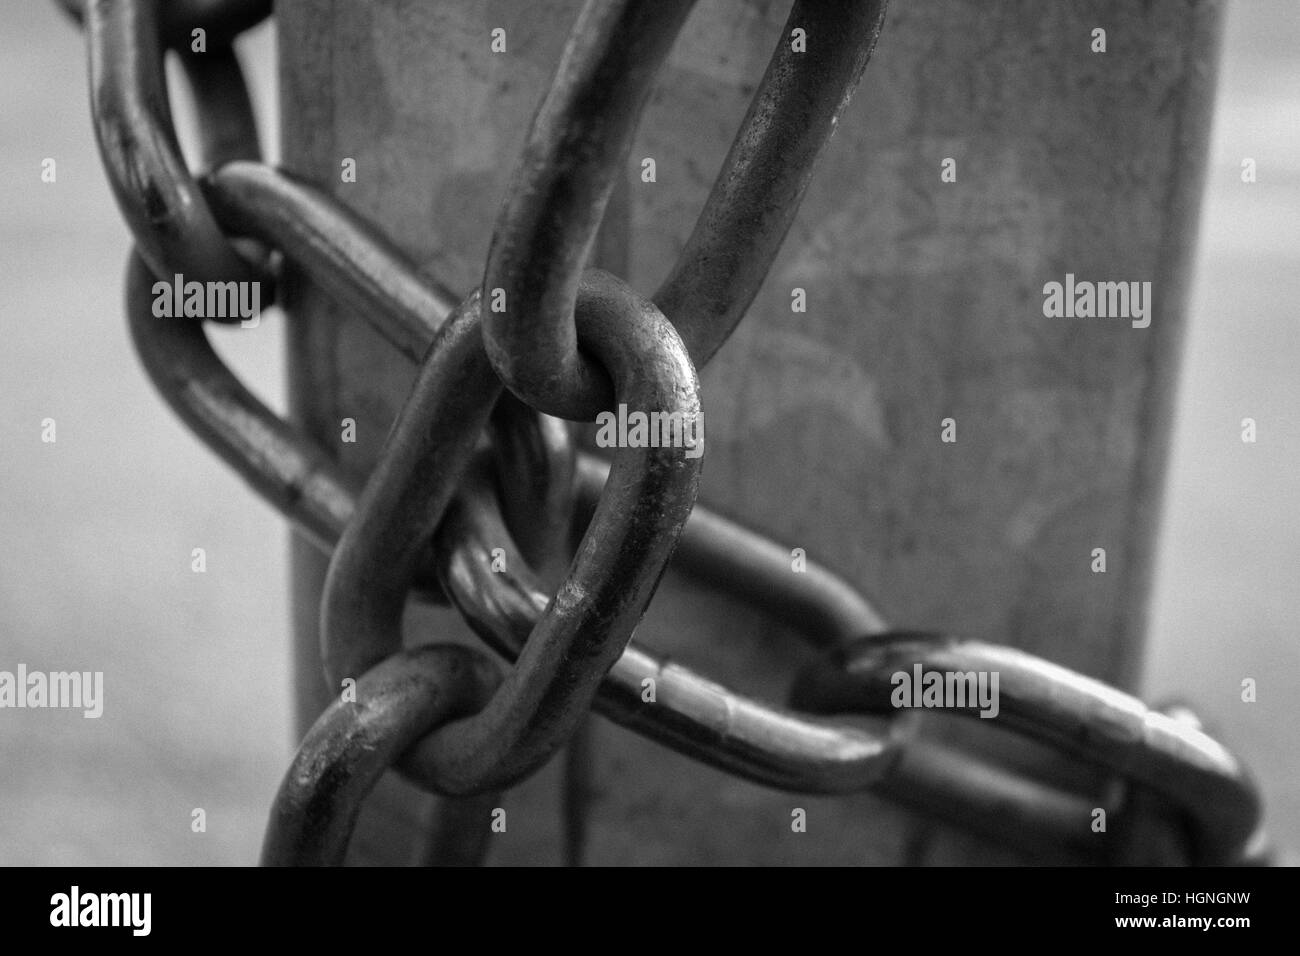 Close-up view of old rusty chain links. Stock Photo